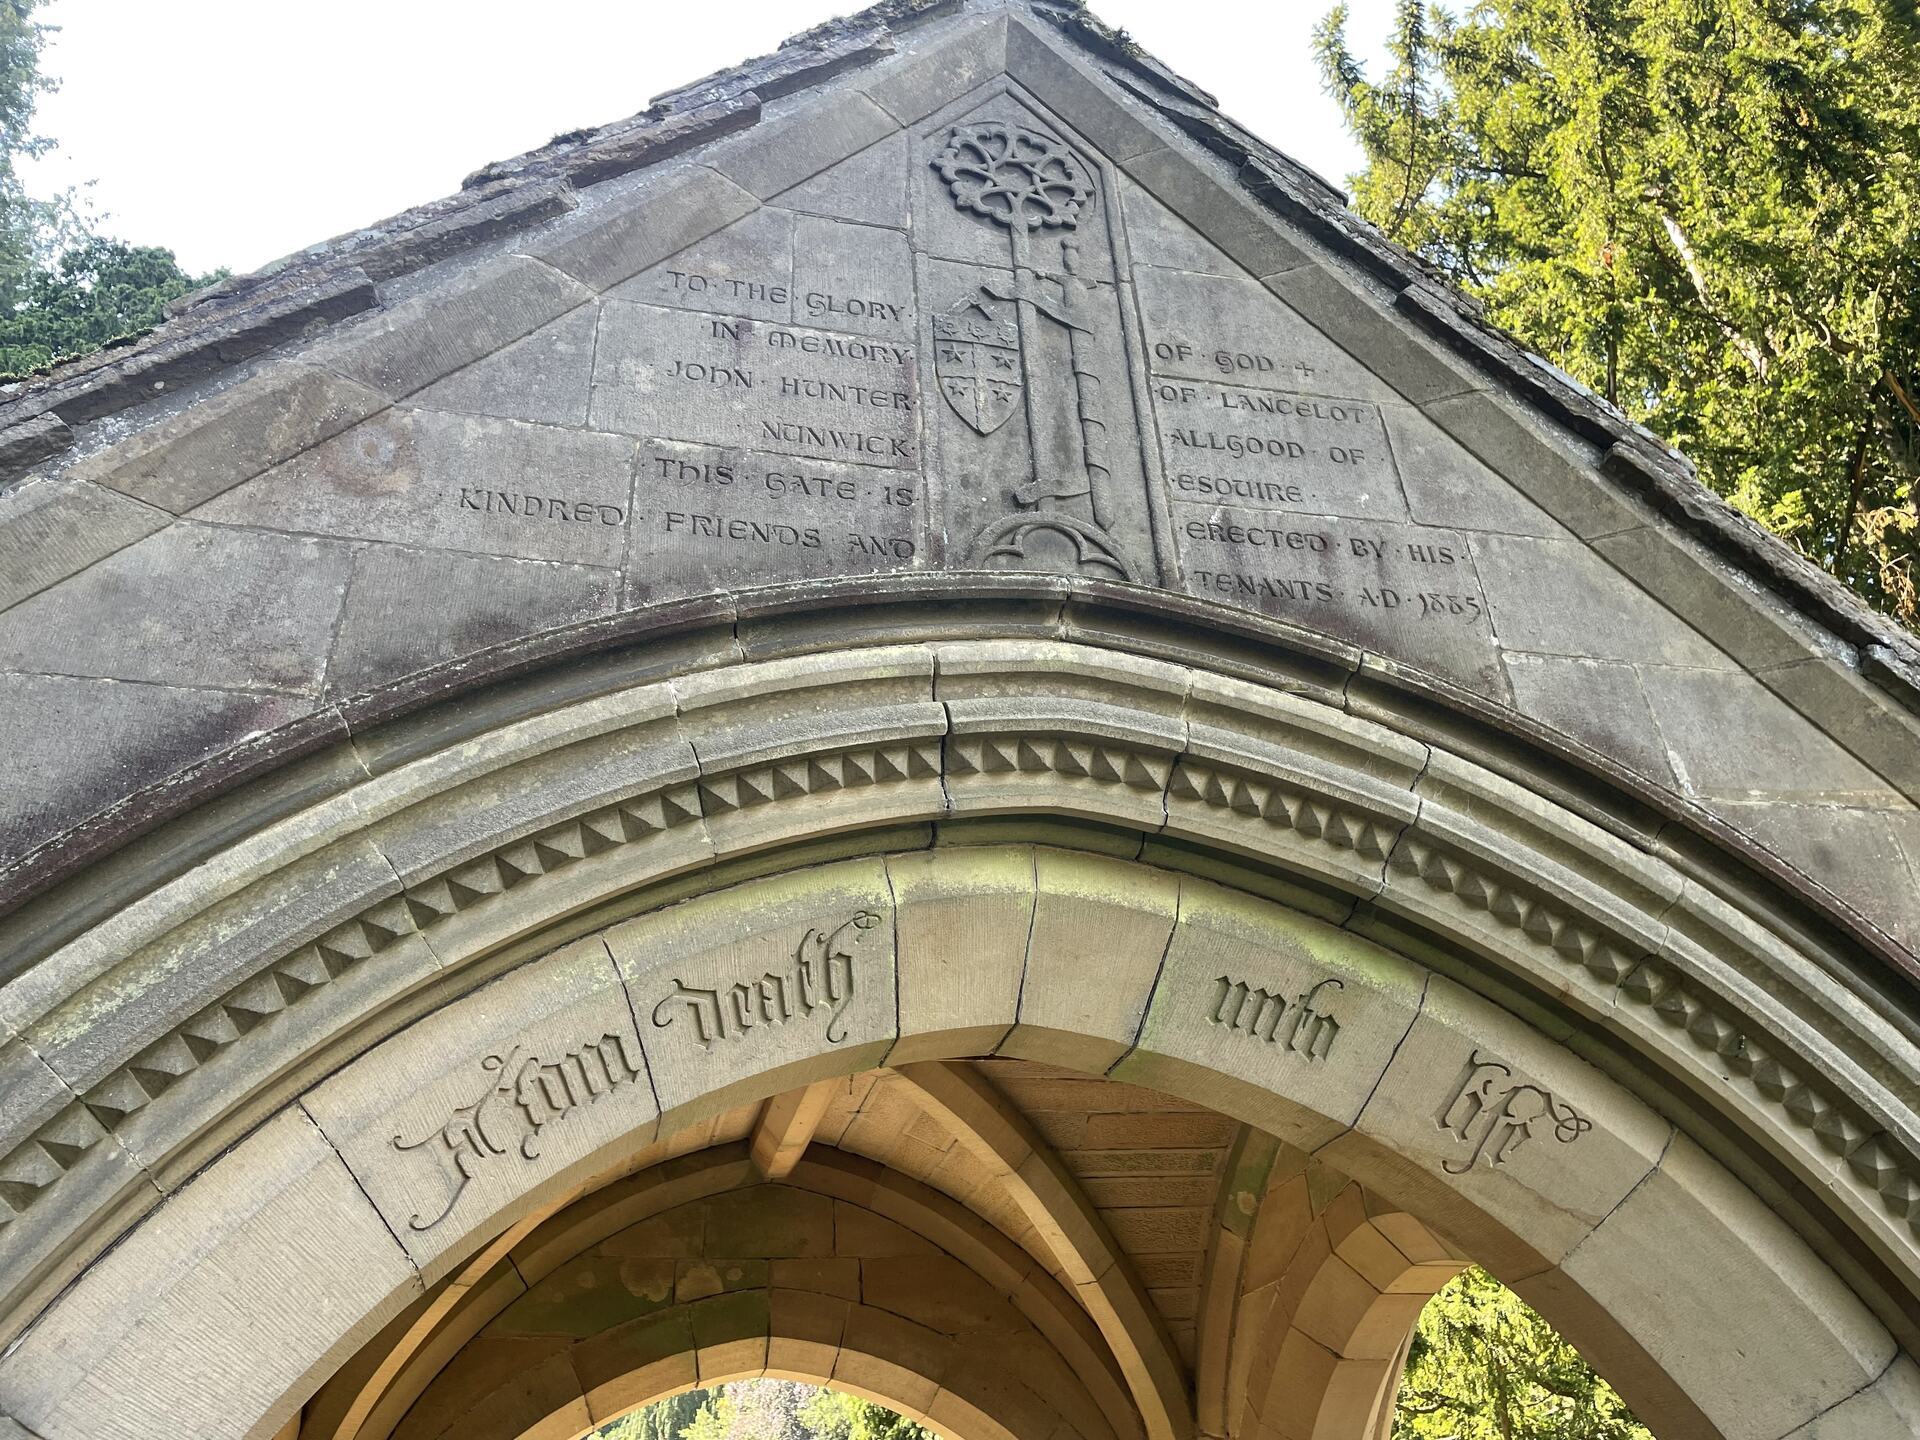 A spooky arch with fantastic typography in Simonburn, Northumberland